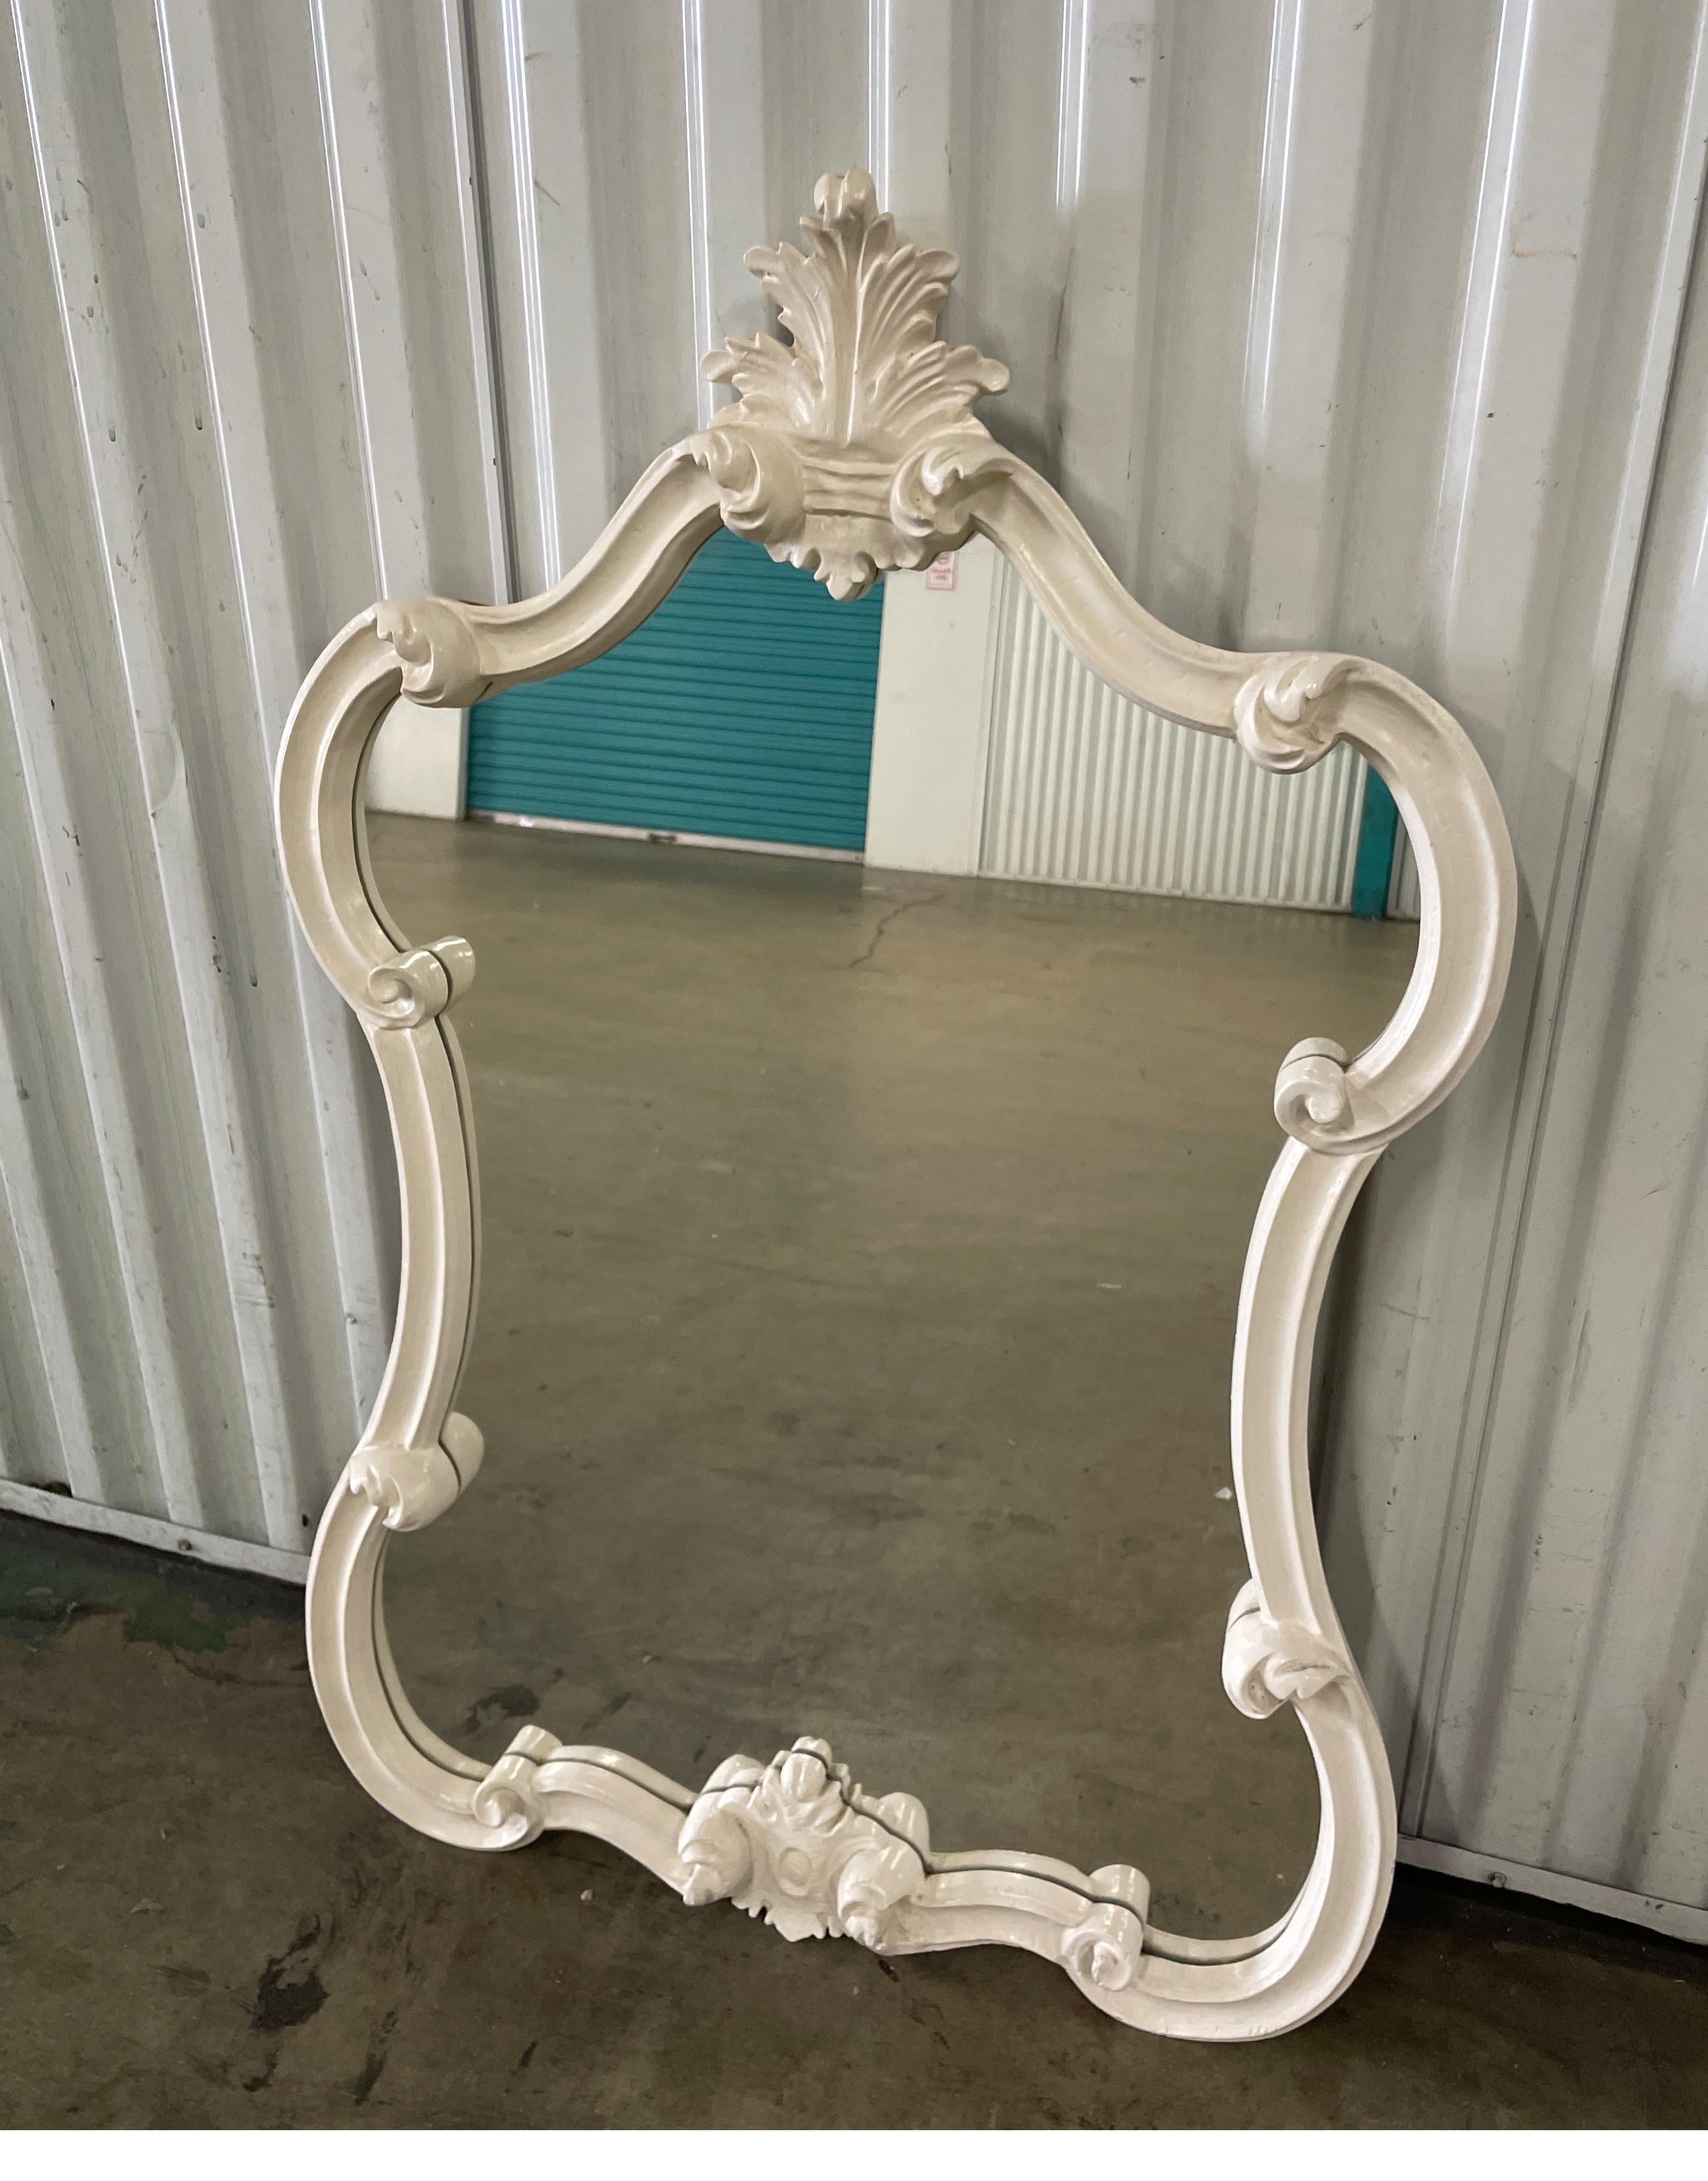 Lovely vintage carved and painted Italian wall mirror. Would be a great powder room or small entry mirror. Simple and elegant.